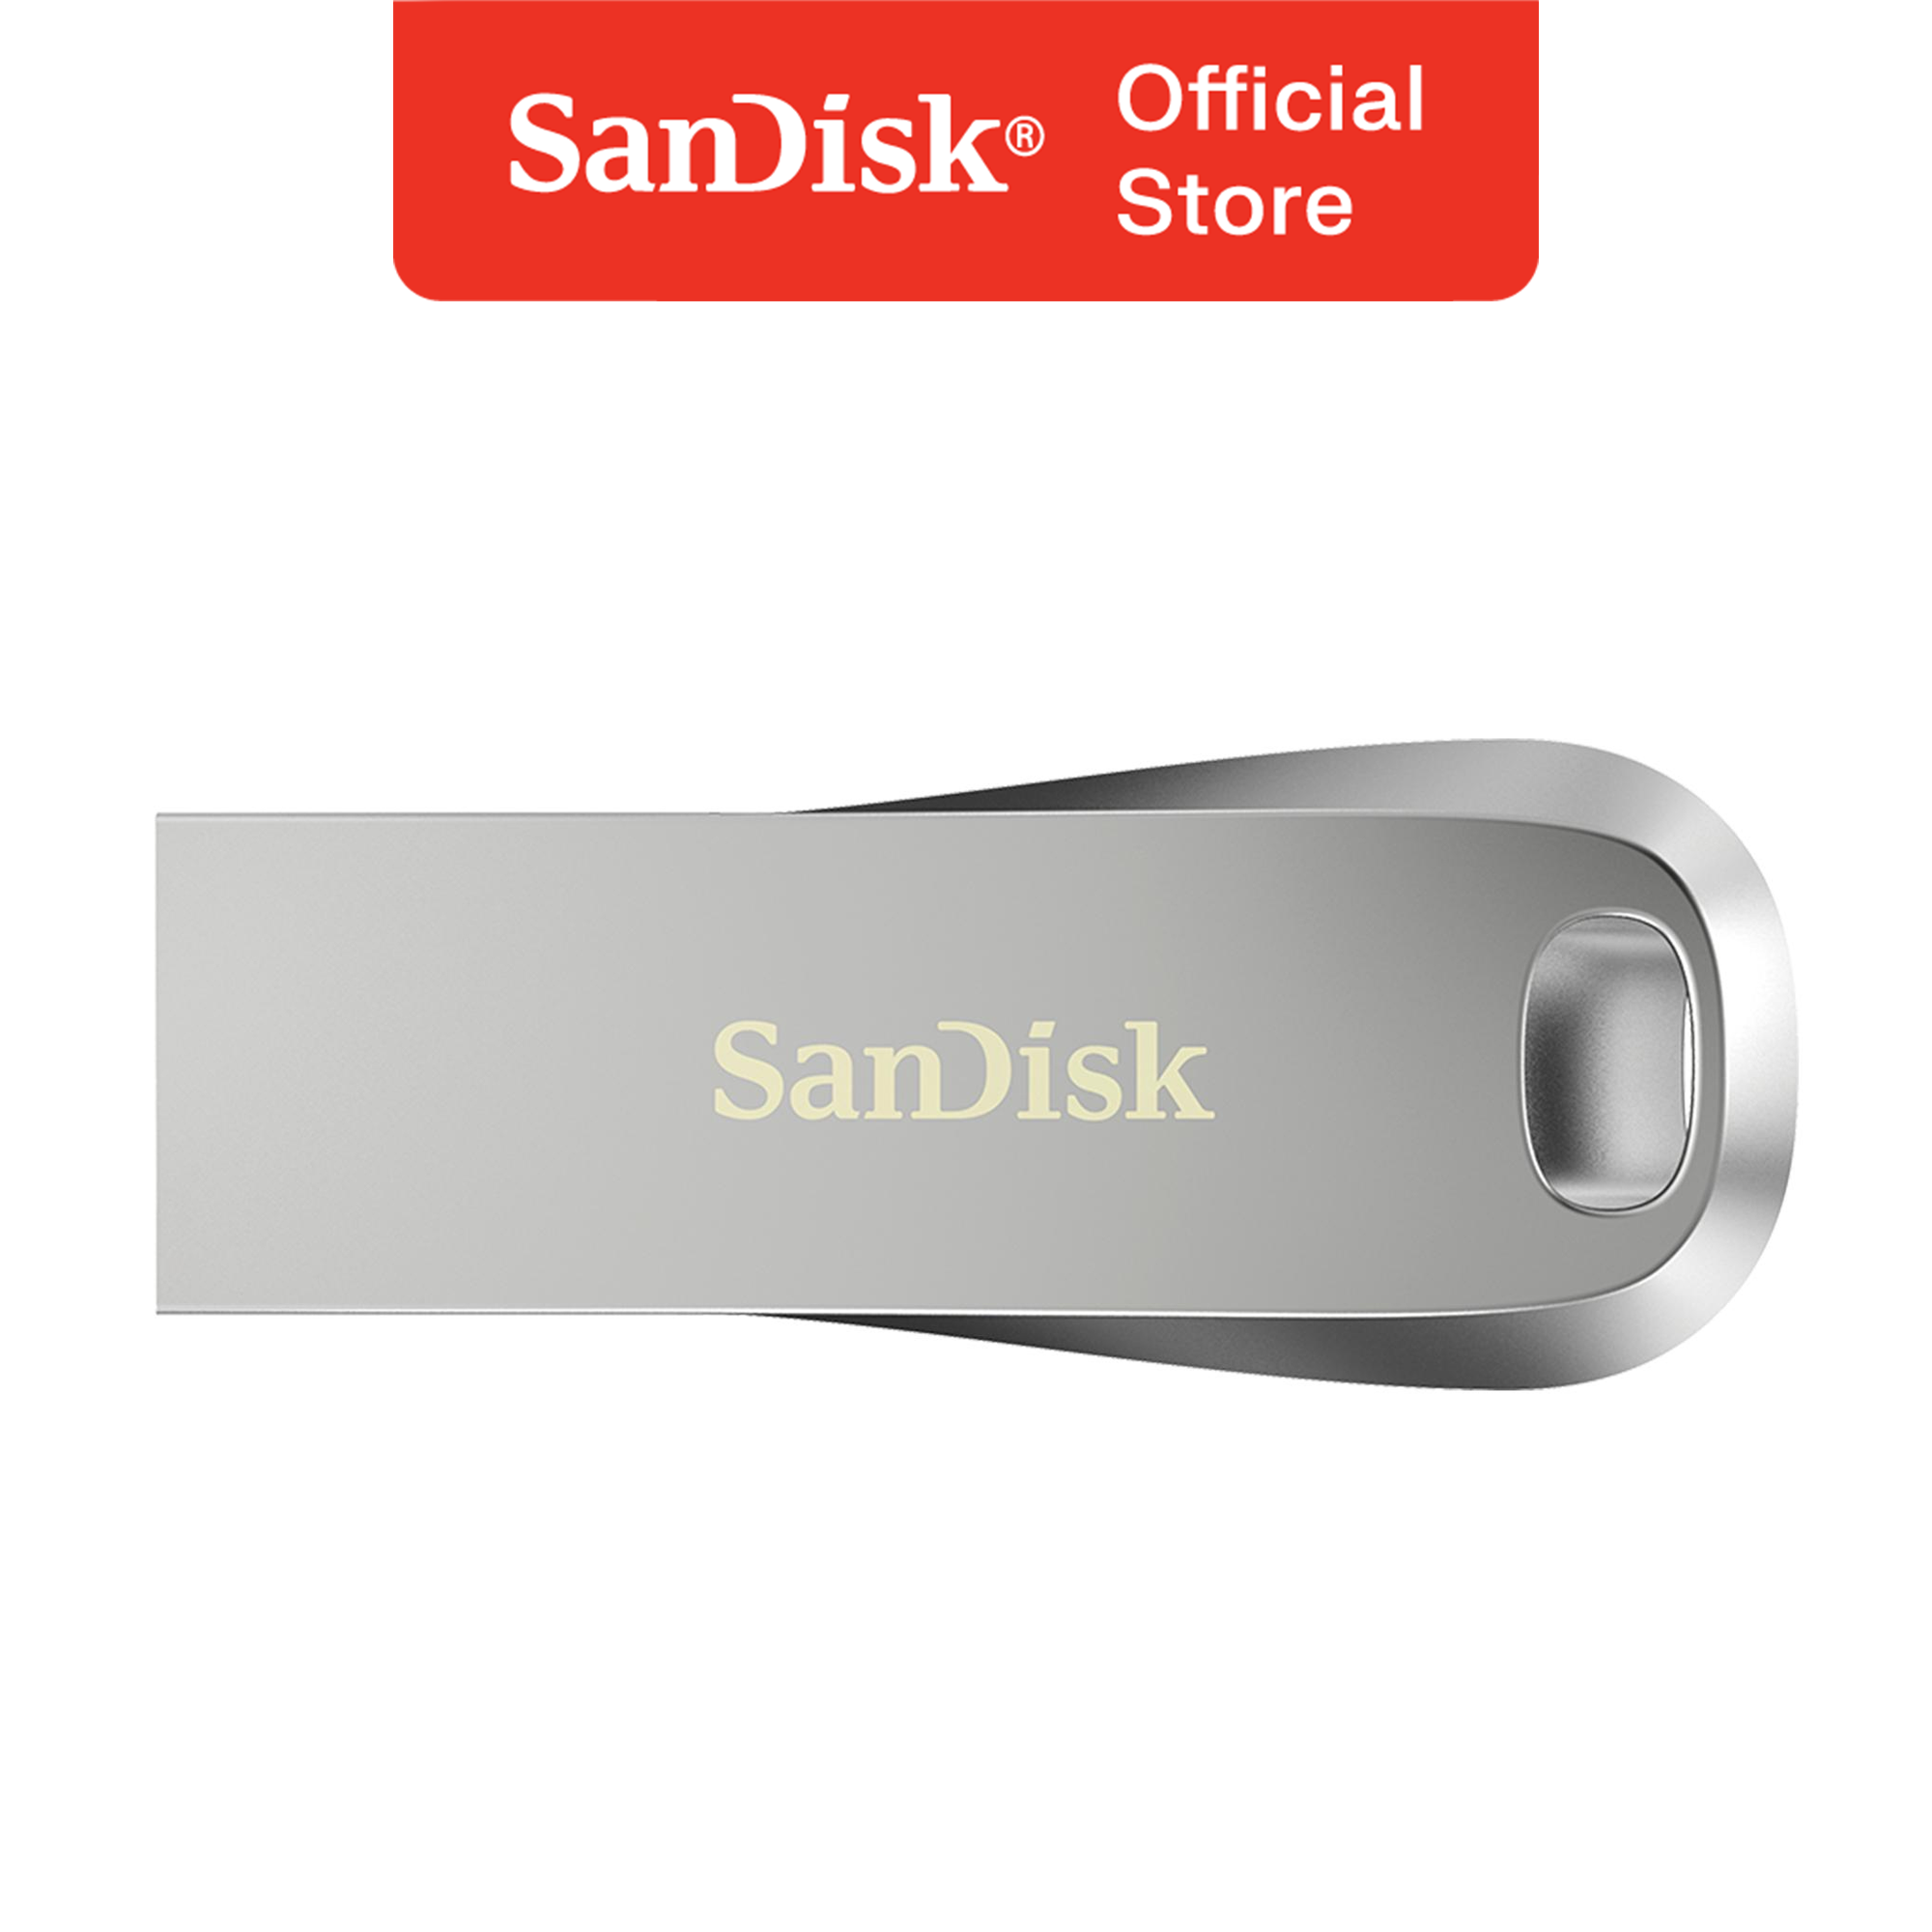 makker Paine Gillic Huddle SanDisk Ultra Luxe 512GB SDCZ74-512G-G46 USB 3.1 Flash Drive Sequential  Read Performance Up to 150MB/s, Supports SanDisk SecureAccess Utility, Mac  and Windows Compatible with Integrated Key Ring Loop | Lazada PH